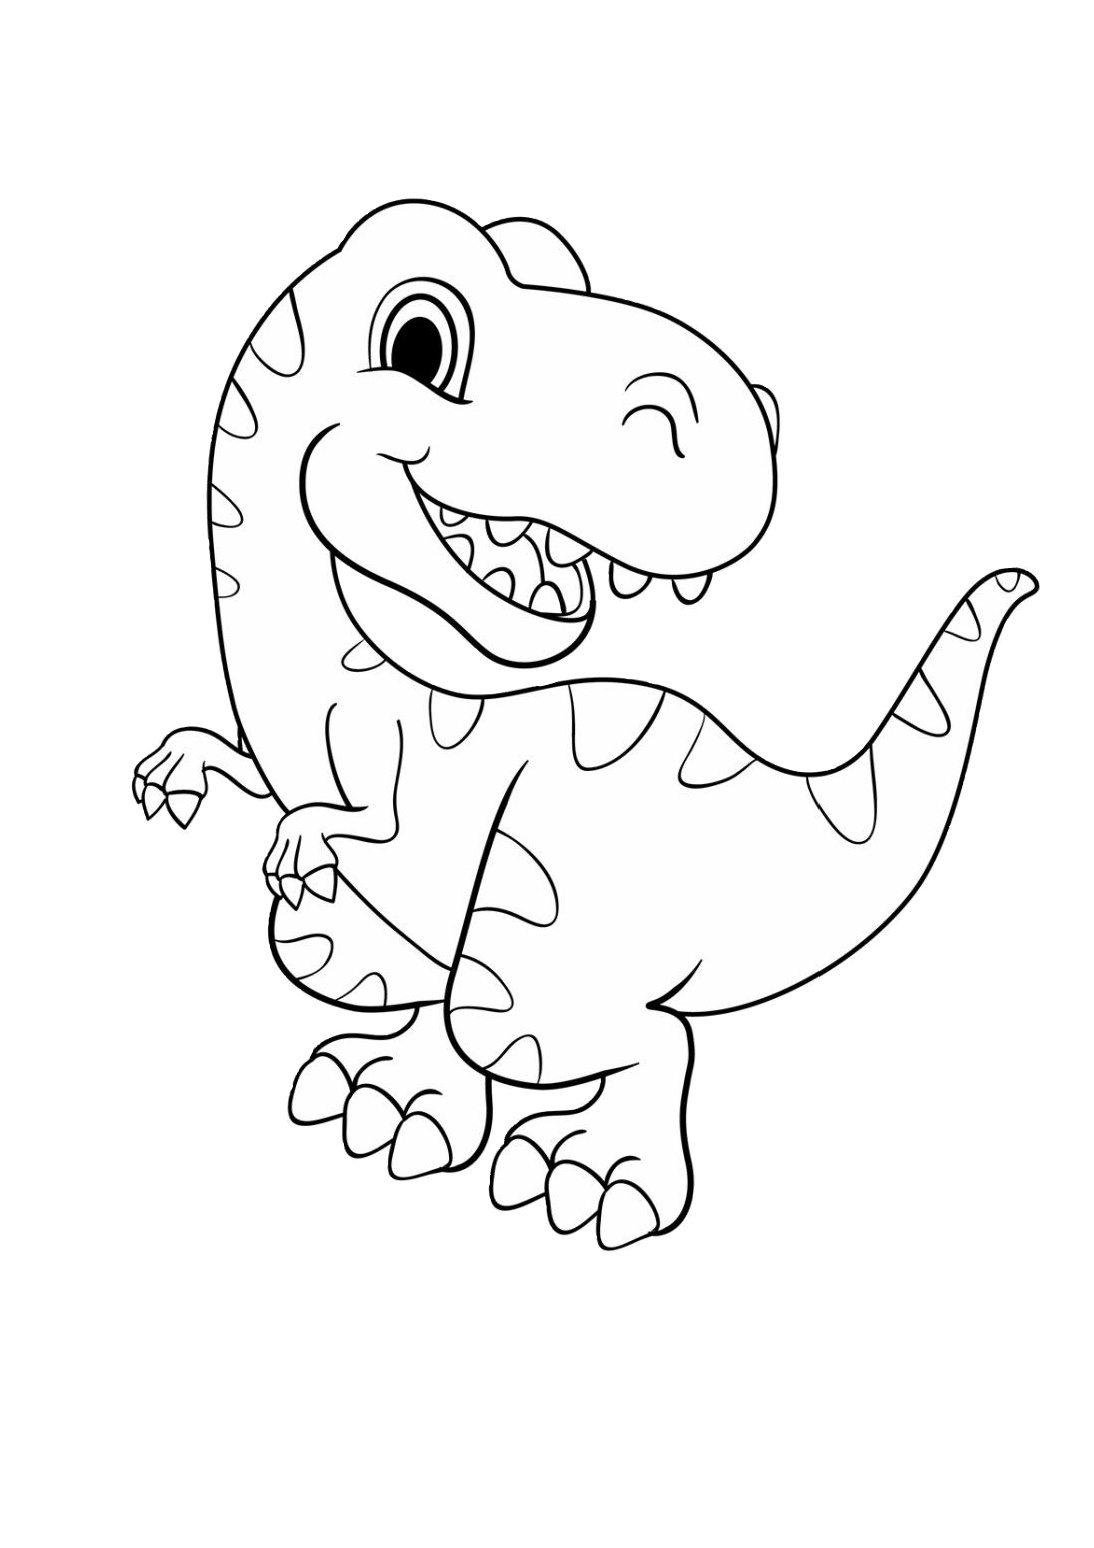 Download Dinosaur Coloring Pages (Updated): Printable PDF » Print ...